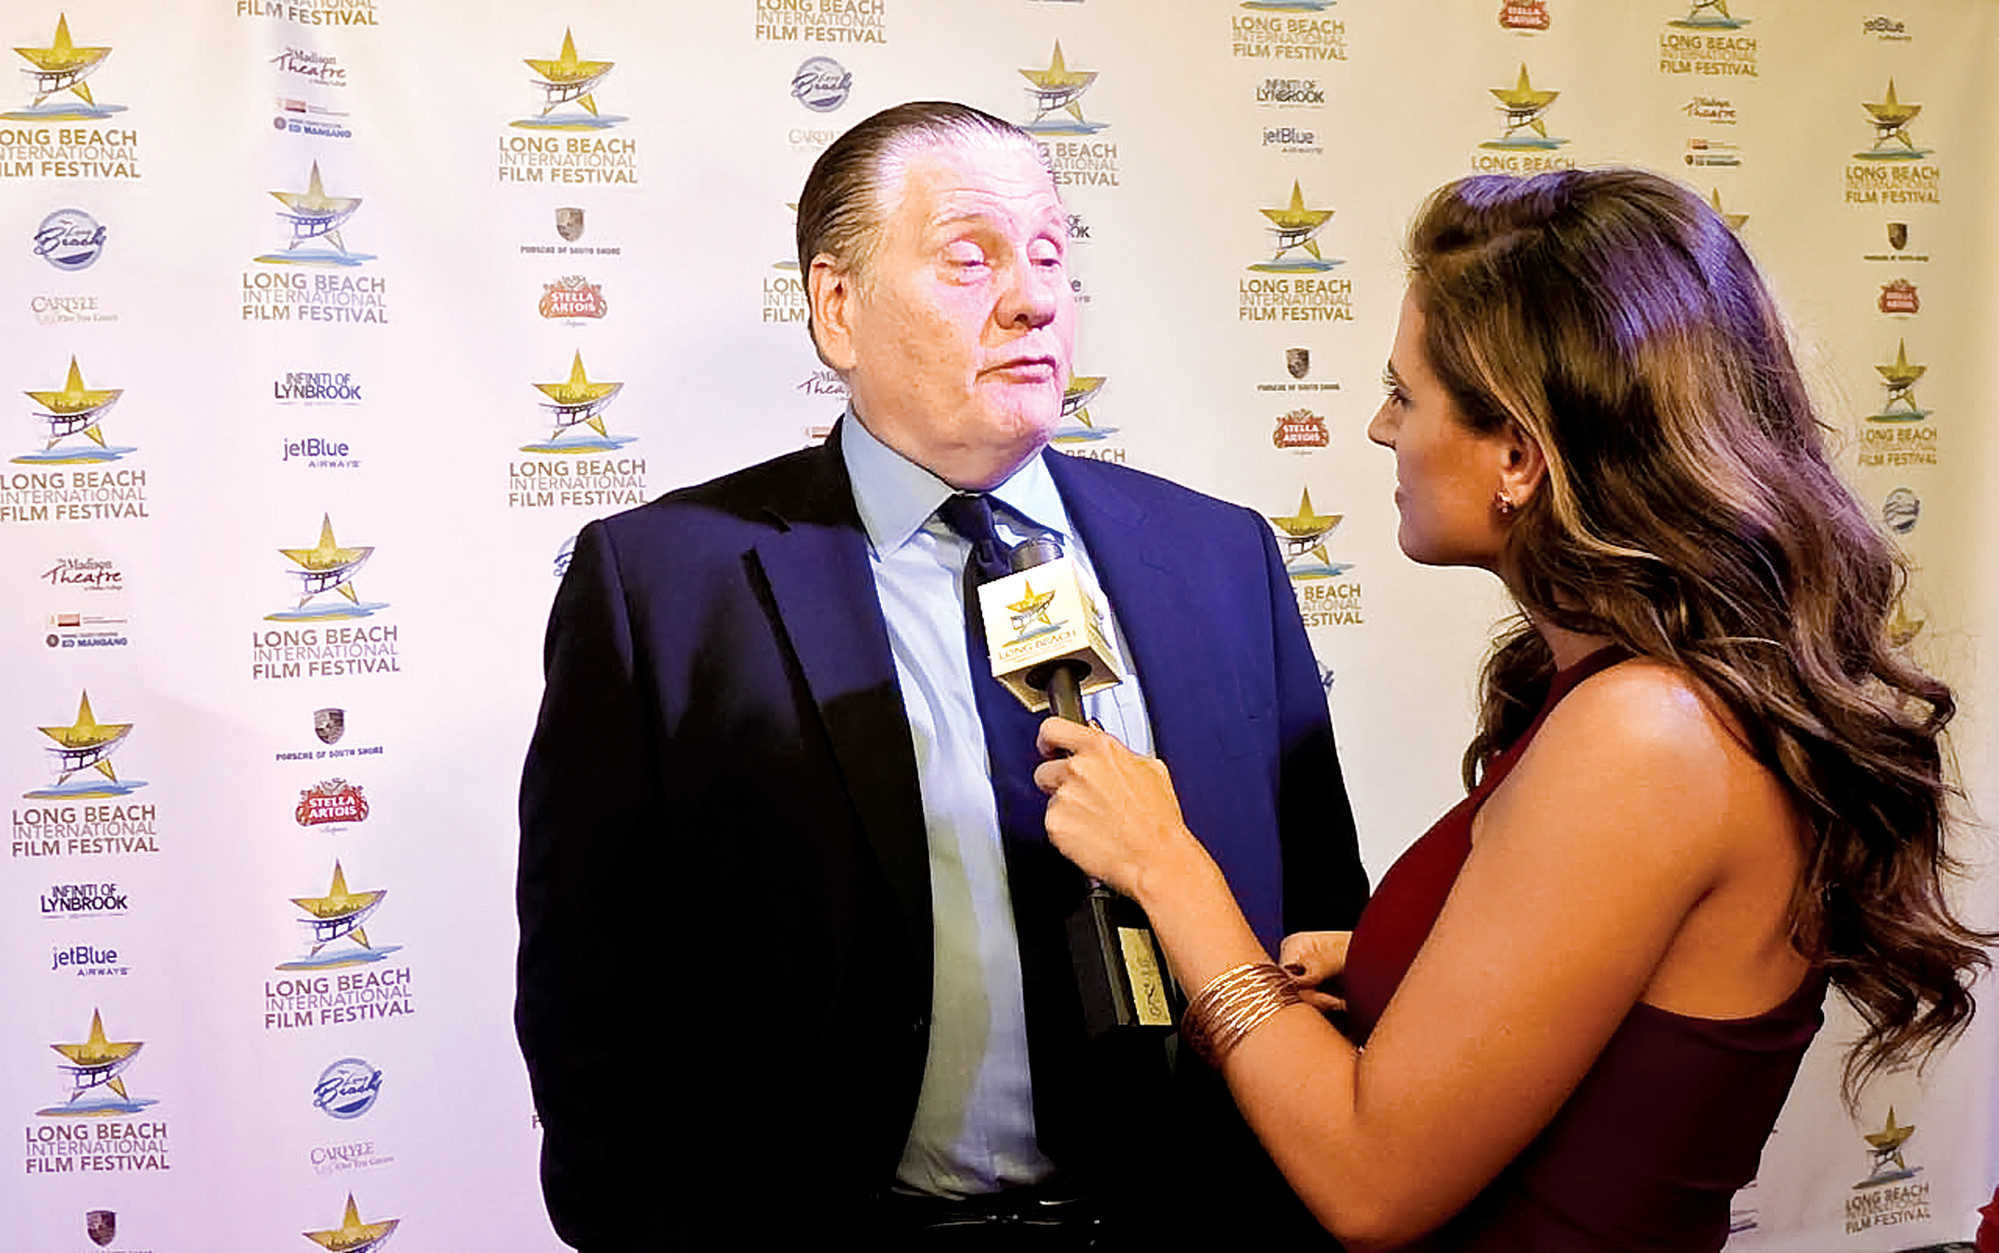 William Forsythe, who played Jake LaMotta in “LaMotta: The Bronx Bull,” which opened the festival, walked the red carpet last Thursday.